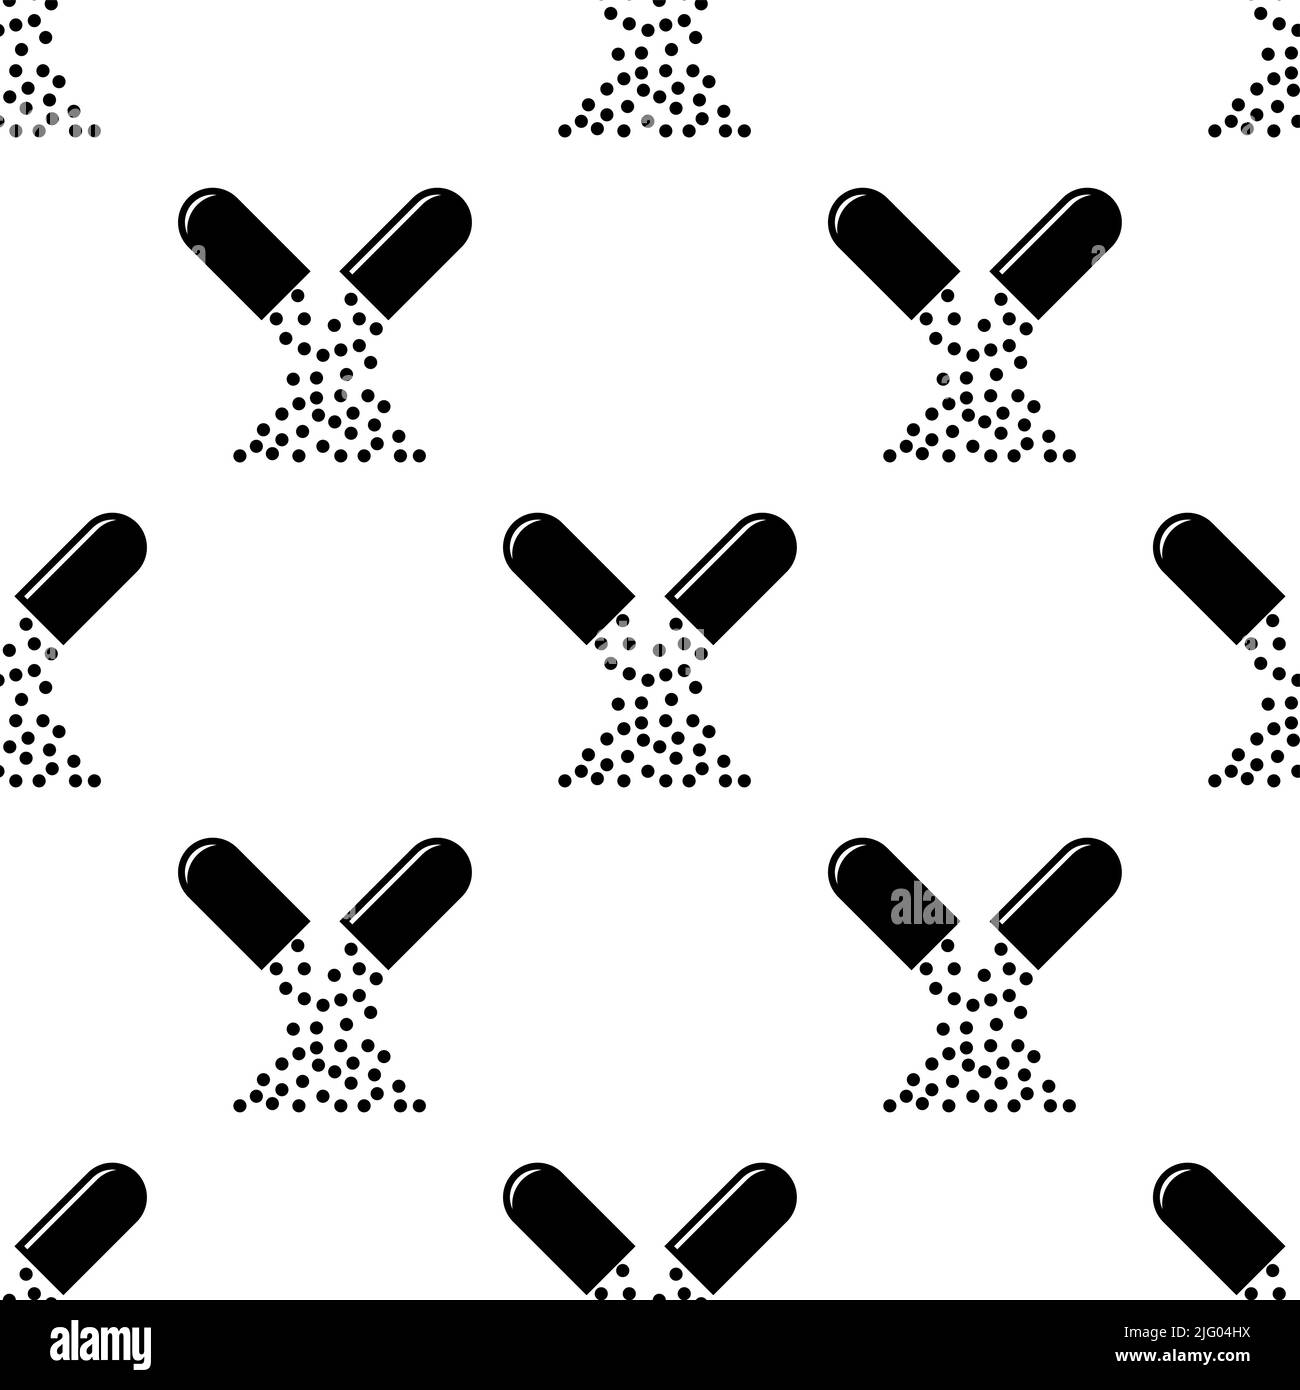 Open Capsule Icon Seamless Pattern, Medicine In Cylindrical Shape Shell Vector Art Illustration Stock Vector